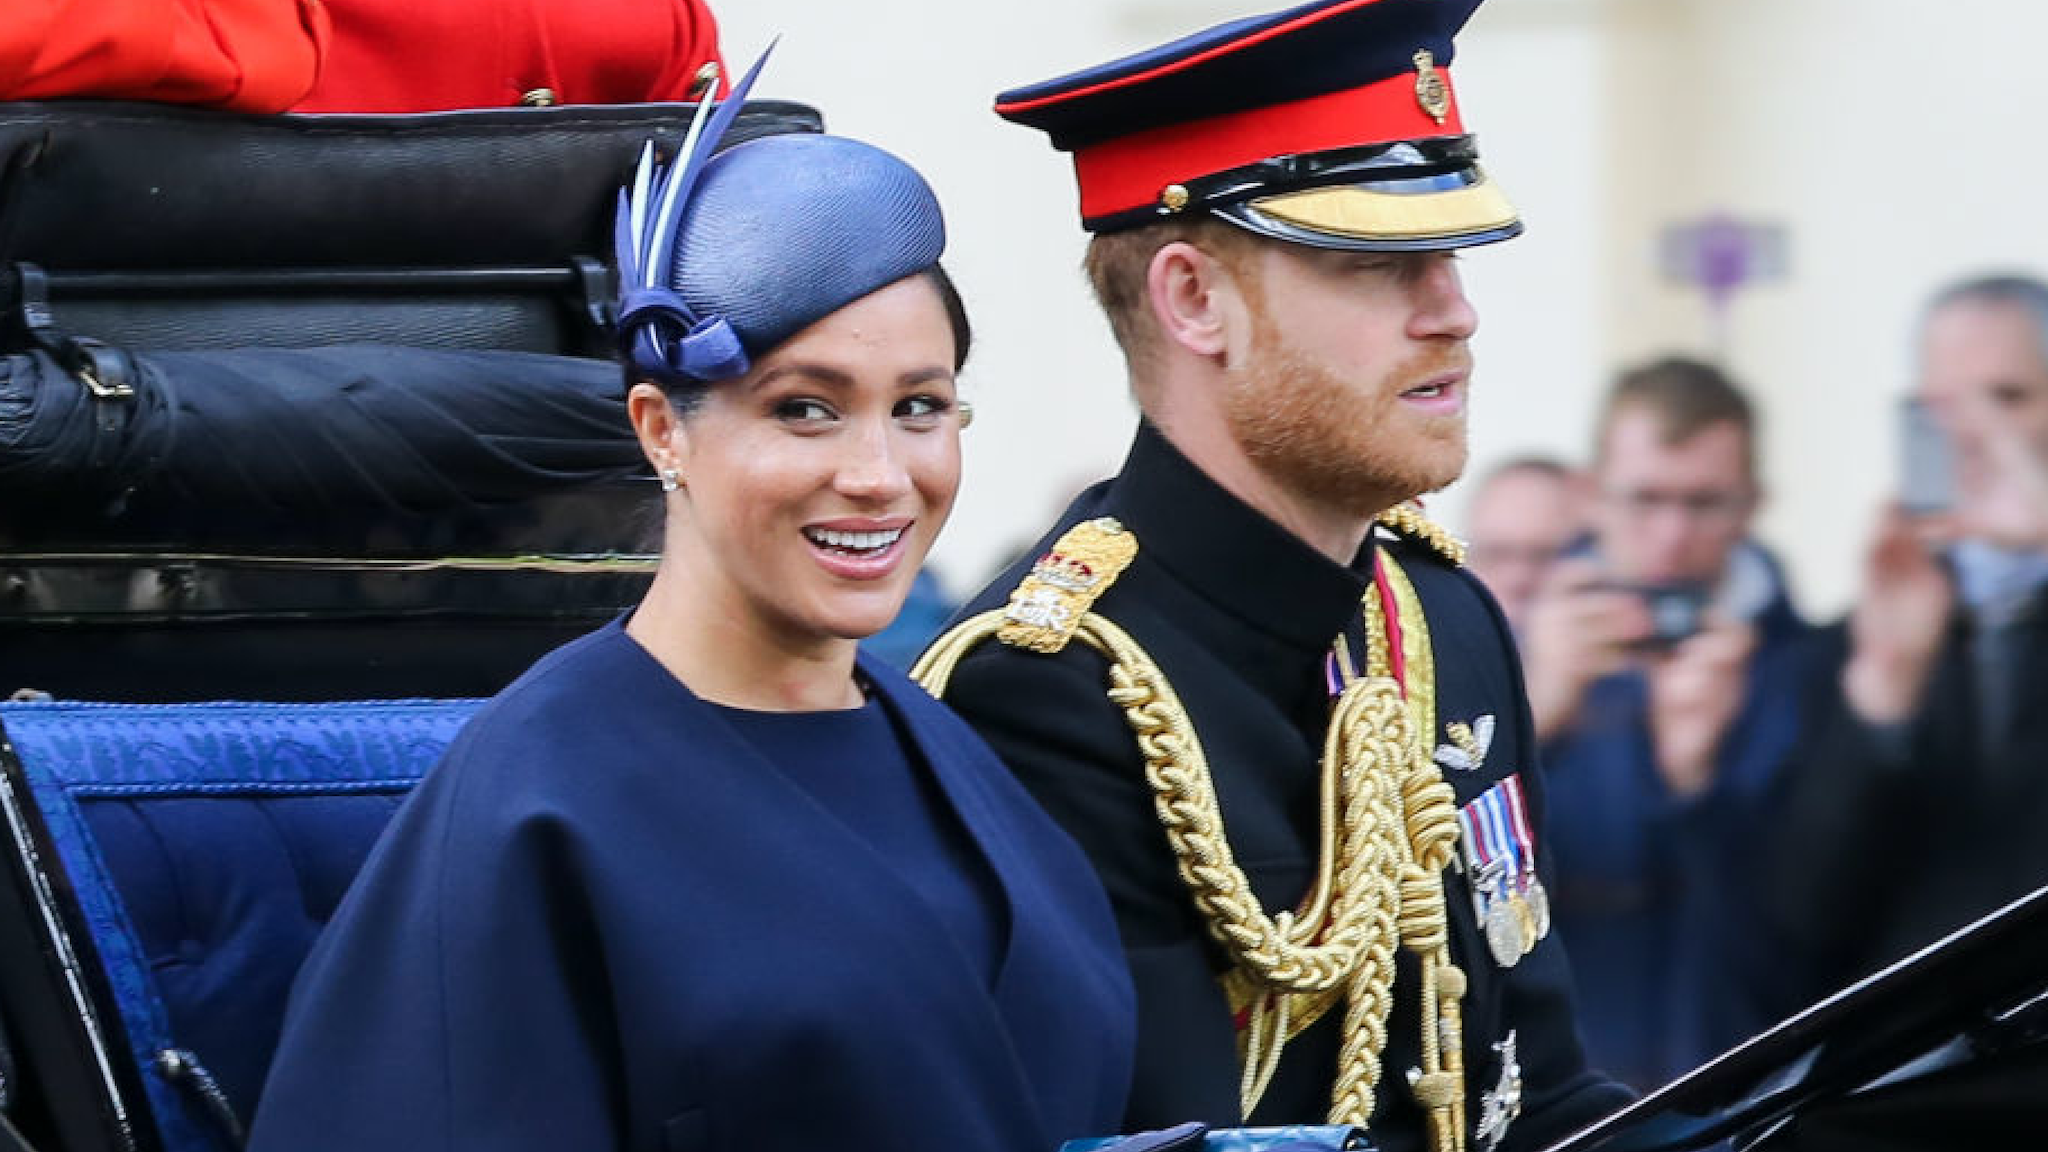 Meghan Duchess of Sussex and Prince Harry are seen in a carriage on their way to Buckingham Palace after attending the Trooping the Colour ceremony, which marks the 93rd birthday of, Queen Elizabeth II, Britain's longest reigning monarch.